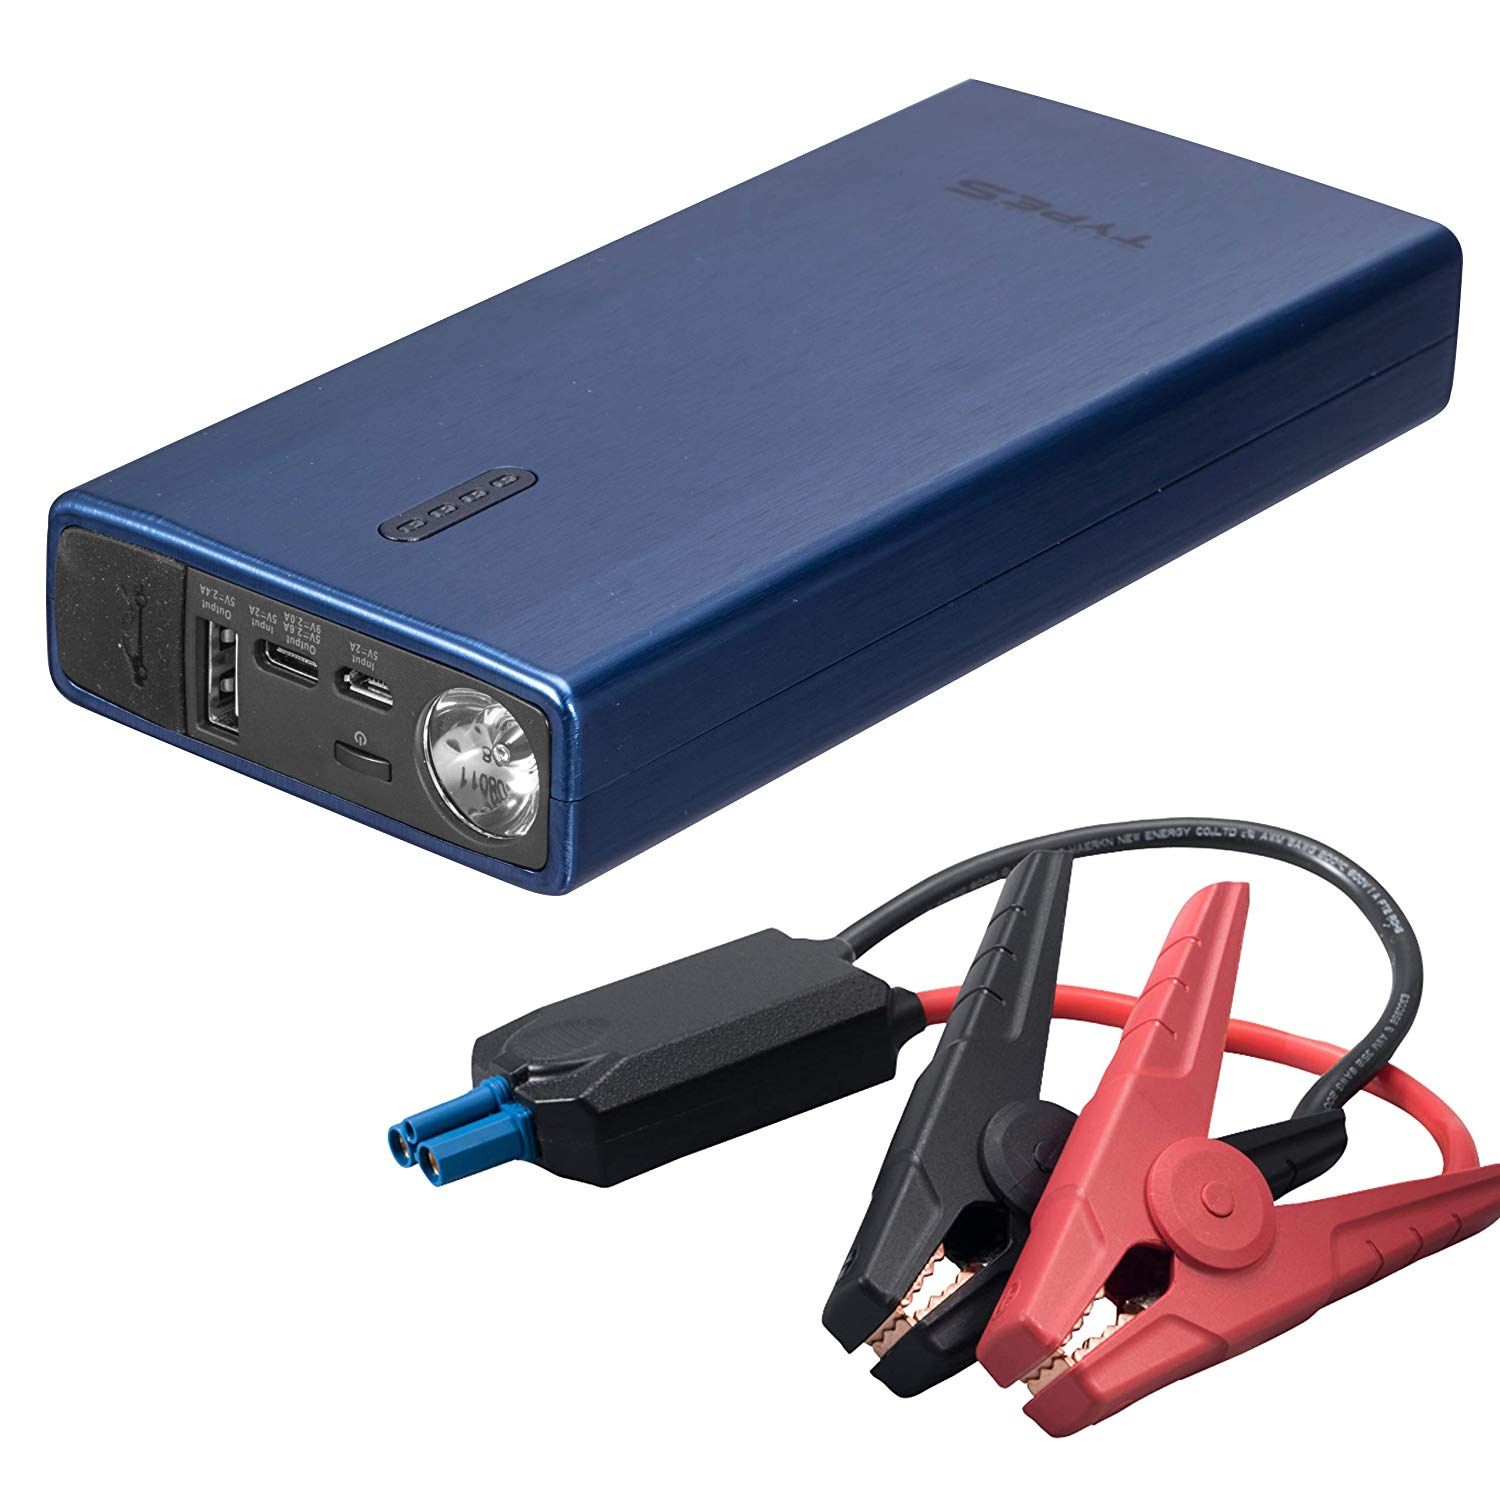  Cobra 1000A Jump Starter - Lithium-ion Jump Starter & Power  Bank with in-Car Jump Starting & Fast Charge USB, LED Flashlight, Jump Start  Cables, 1000 Amp Peak Power for Any Car